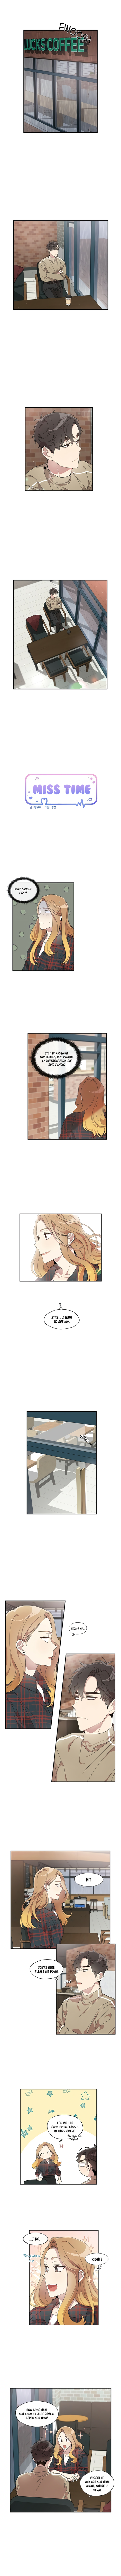 Miss Time Ch. 23